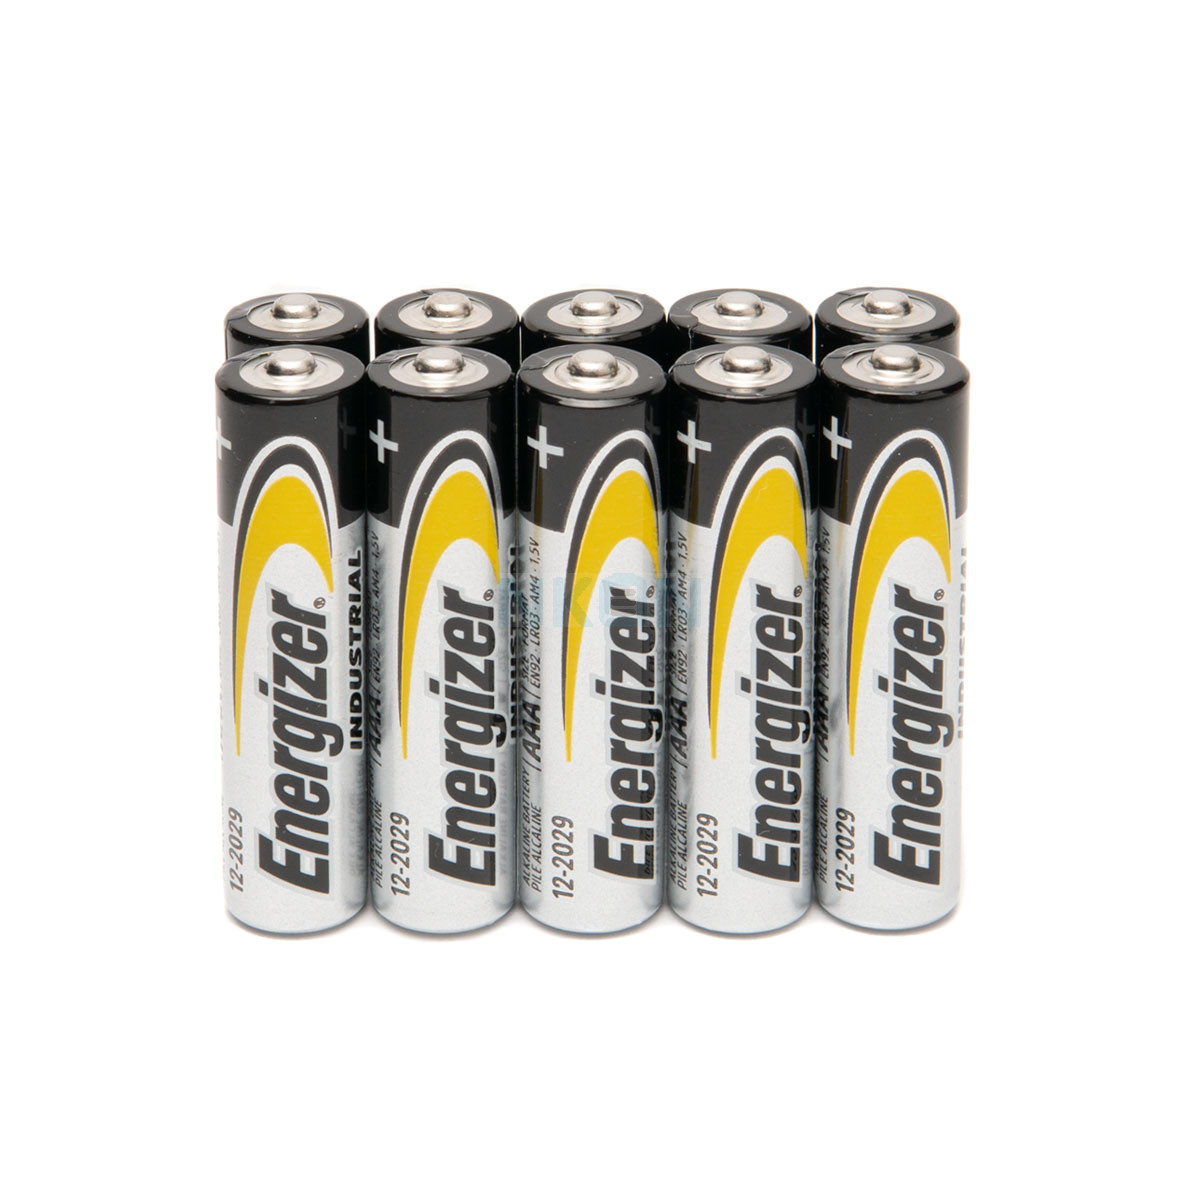 Energizer Industrial AAA LR03 Batteries | Box of 10